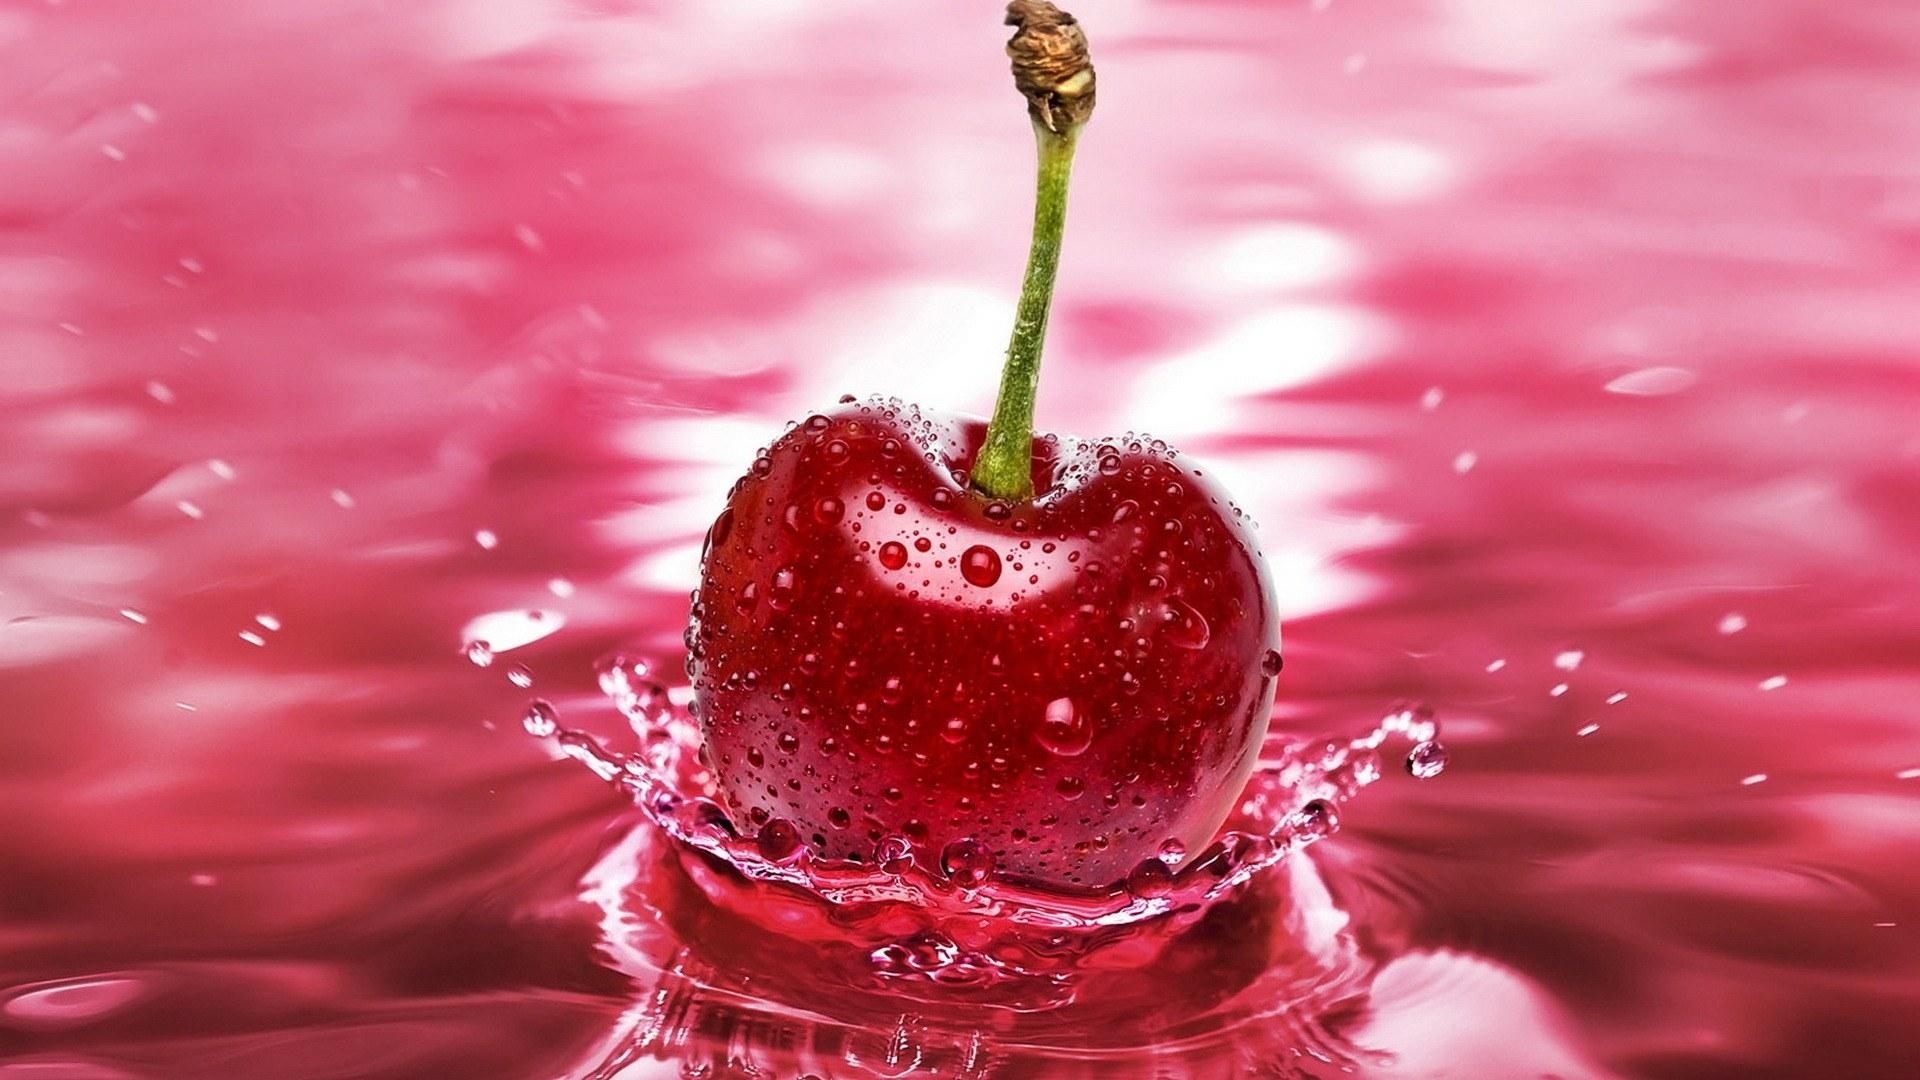 fruits, drops, water, food, cherry, red 32K